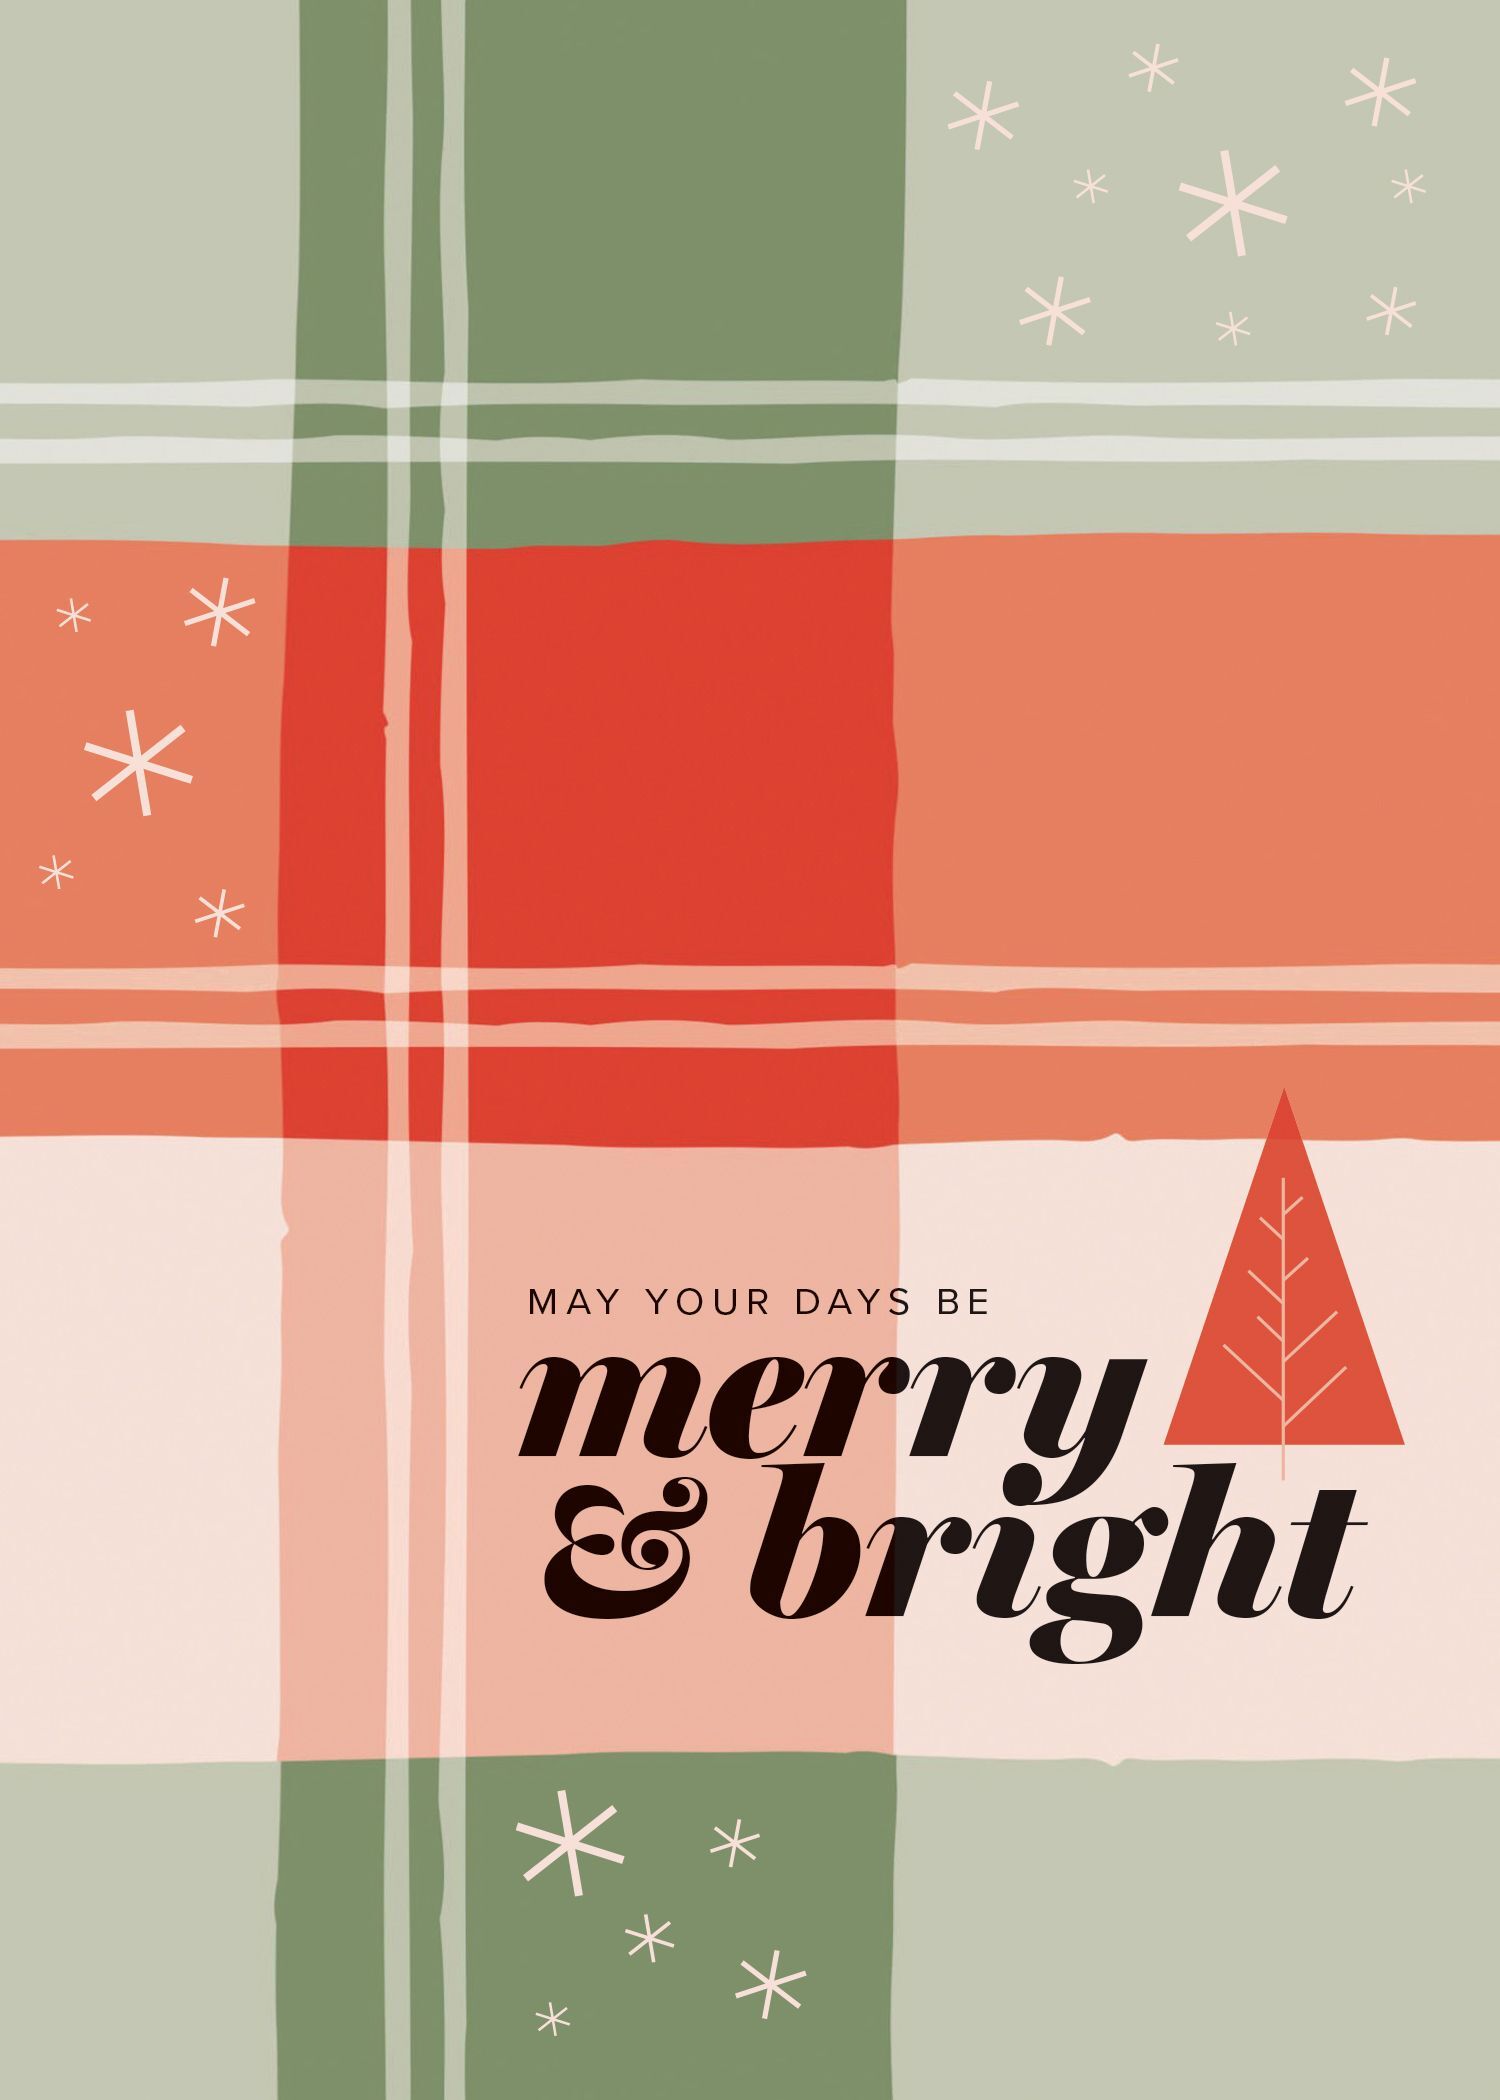 "Merry and Bright" by Beth Jones